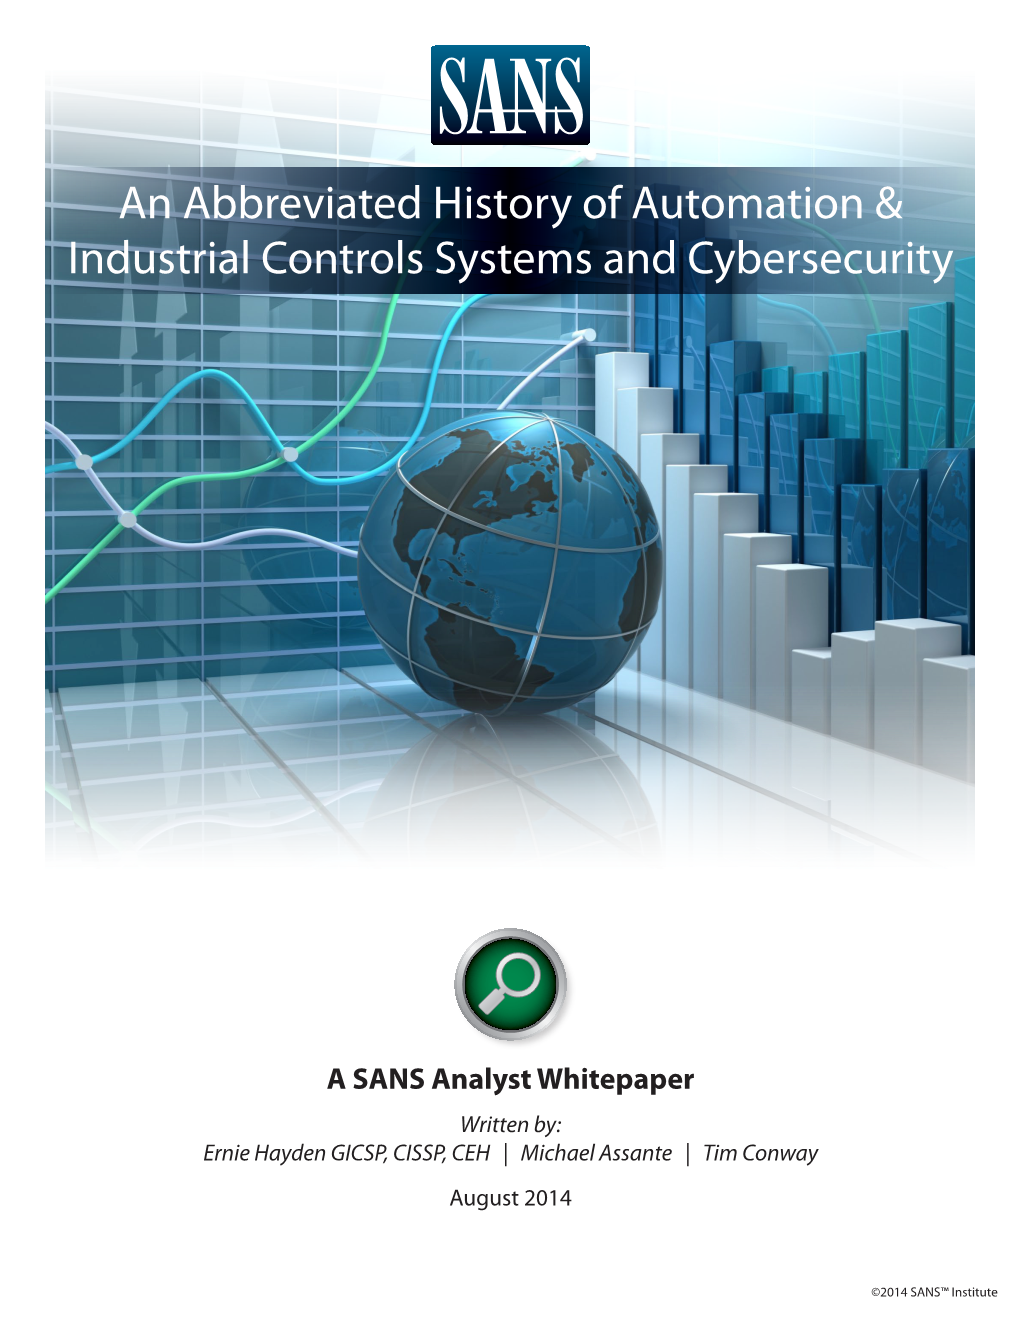 An Abbreviated History of Automation & Industrial Controls Systems And